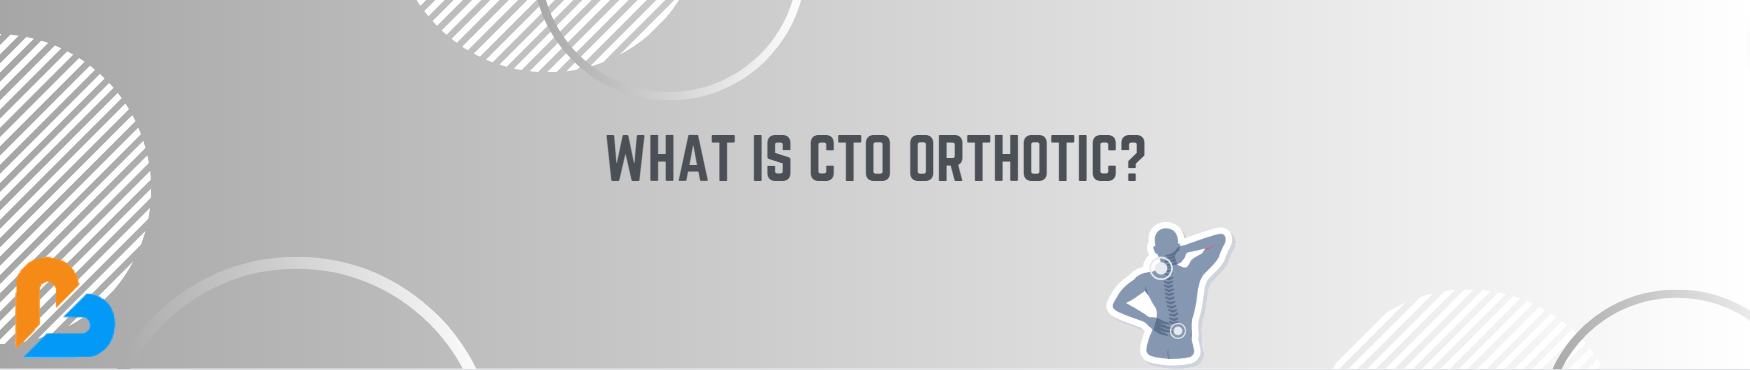 What is CTO orthotic?